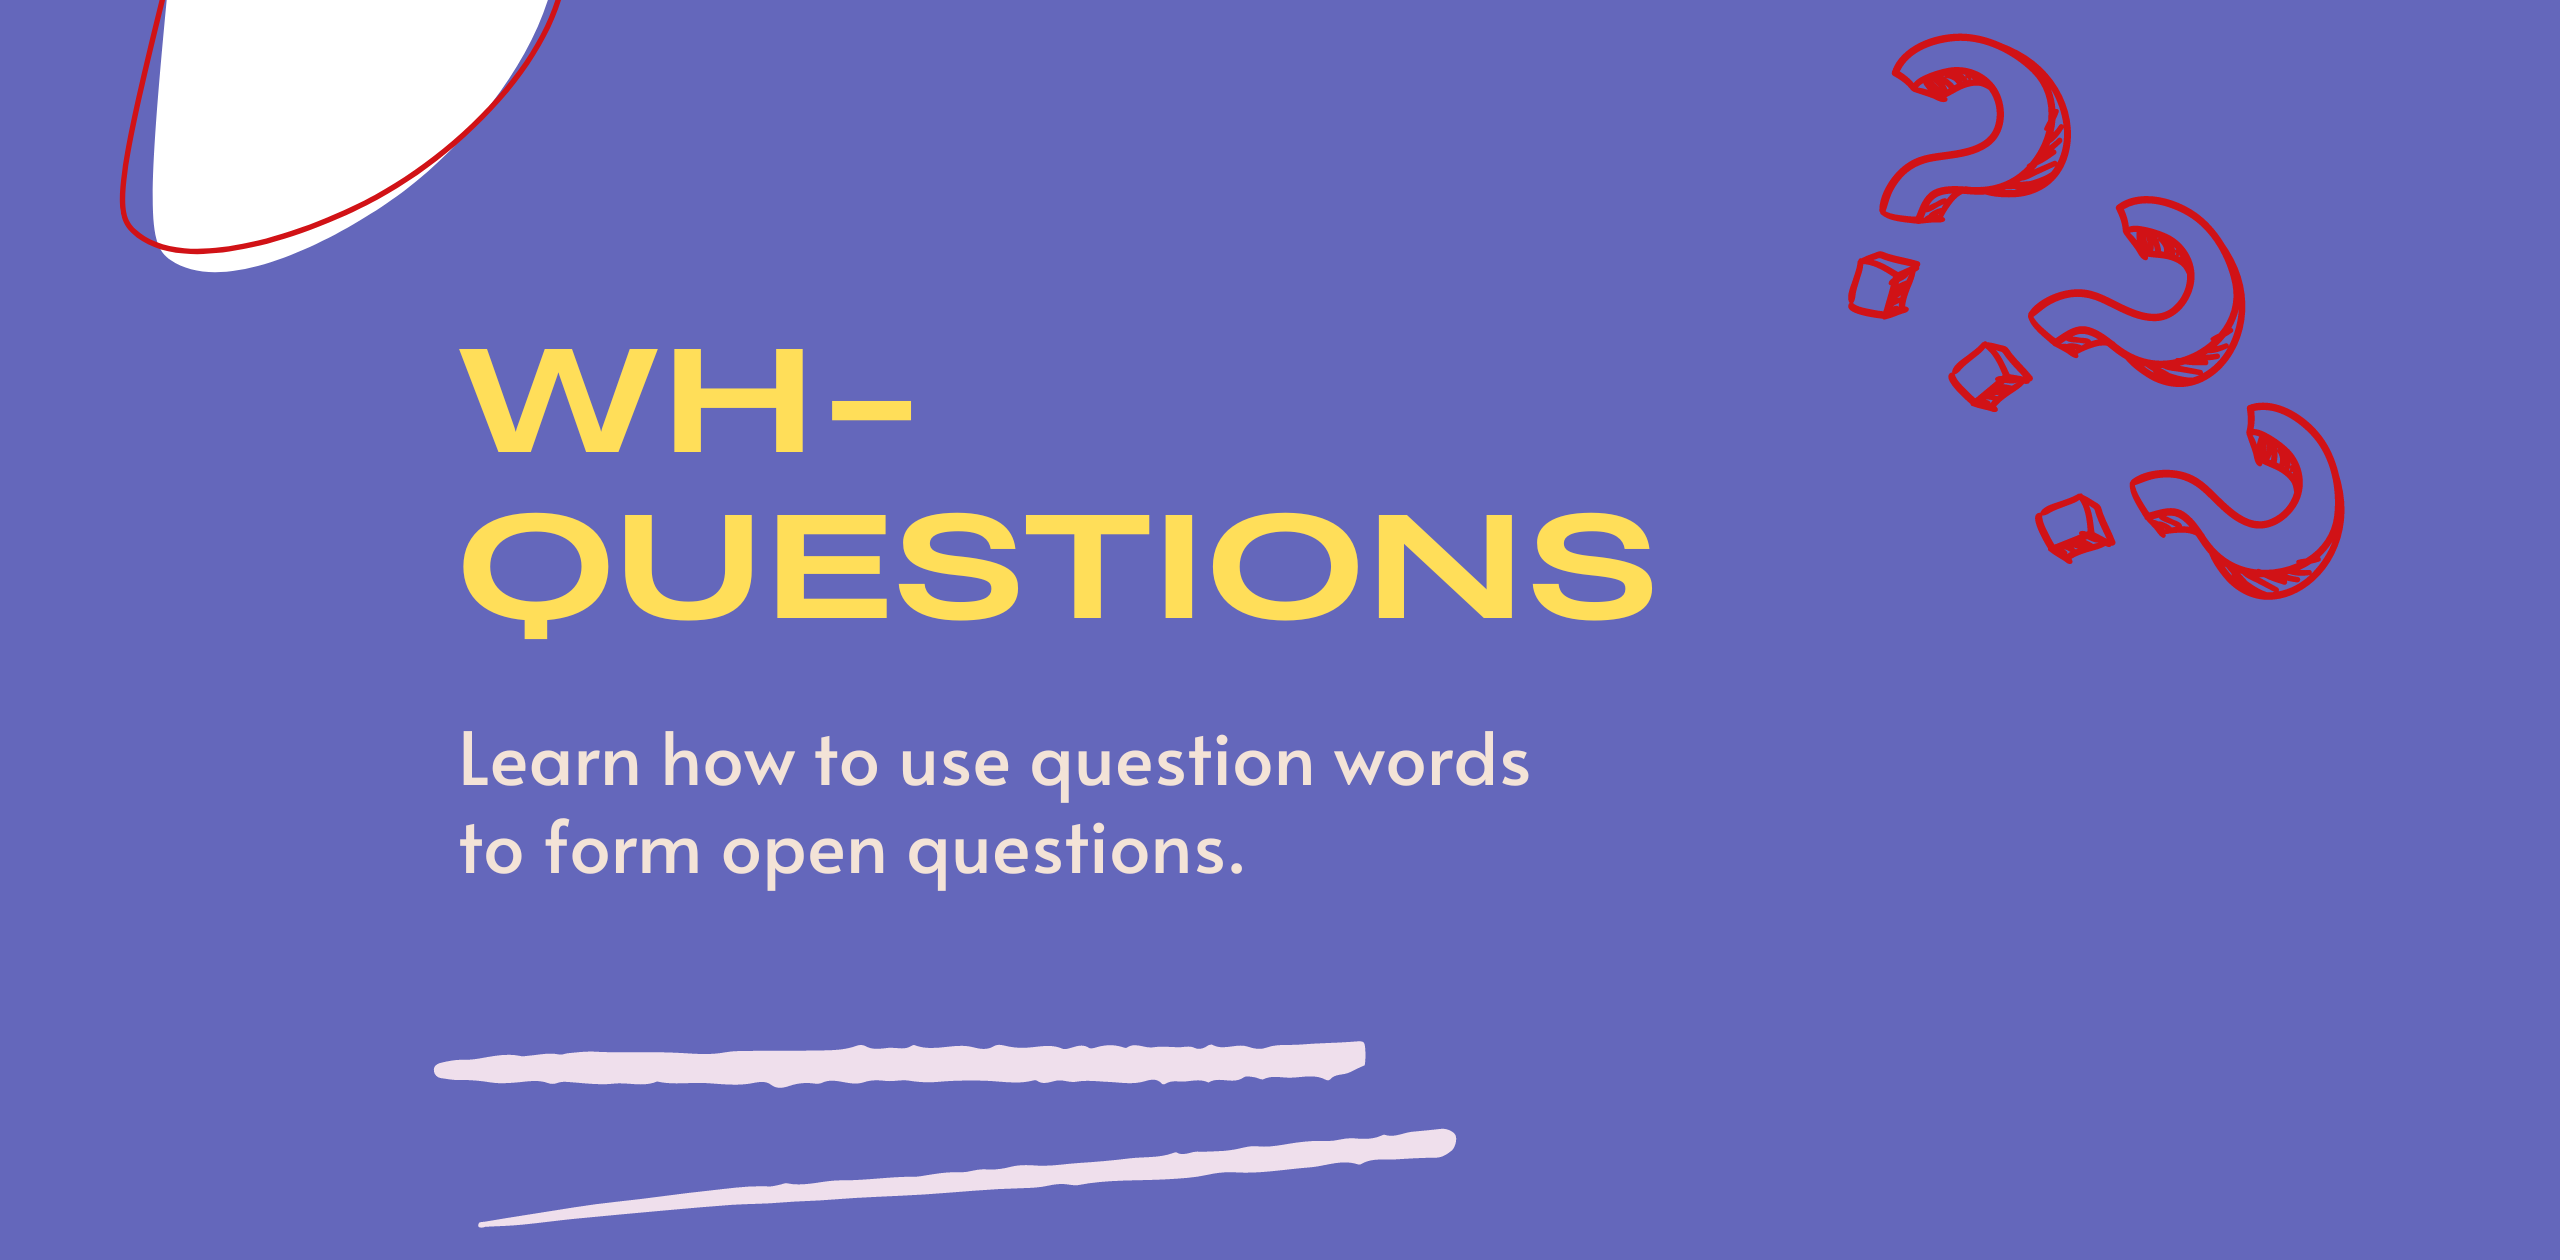 Wh-questions in English